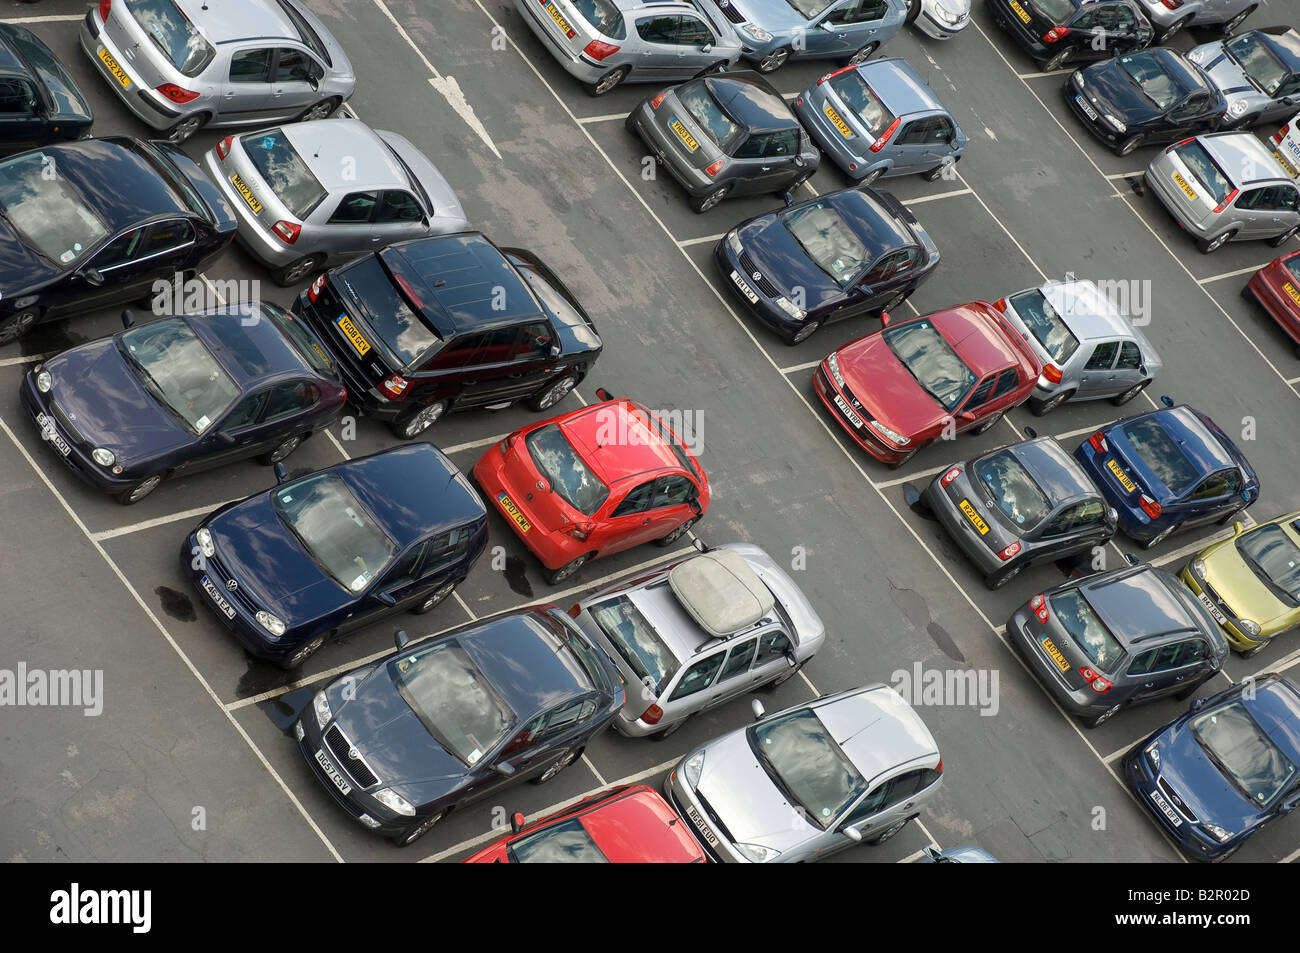 Aerial view of cars parked in a city town centre public car park parking England UK United Kingdom GB Great Britain Stock Photo